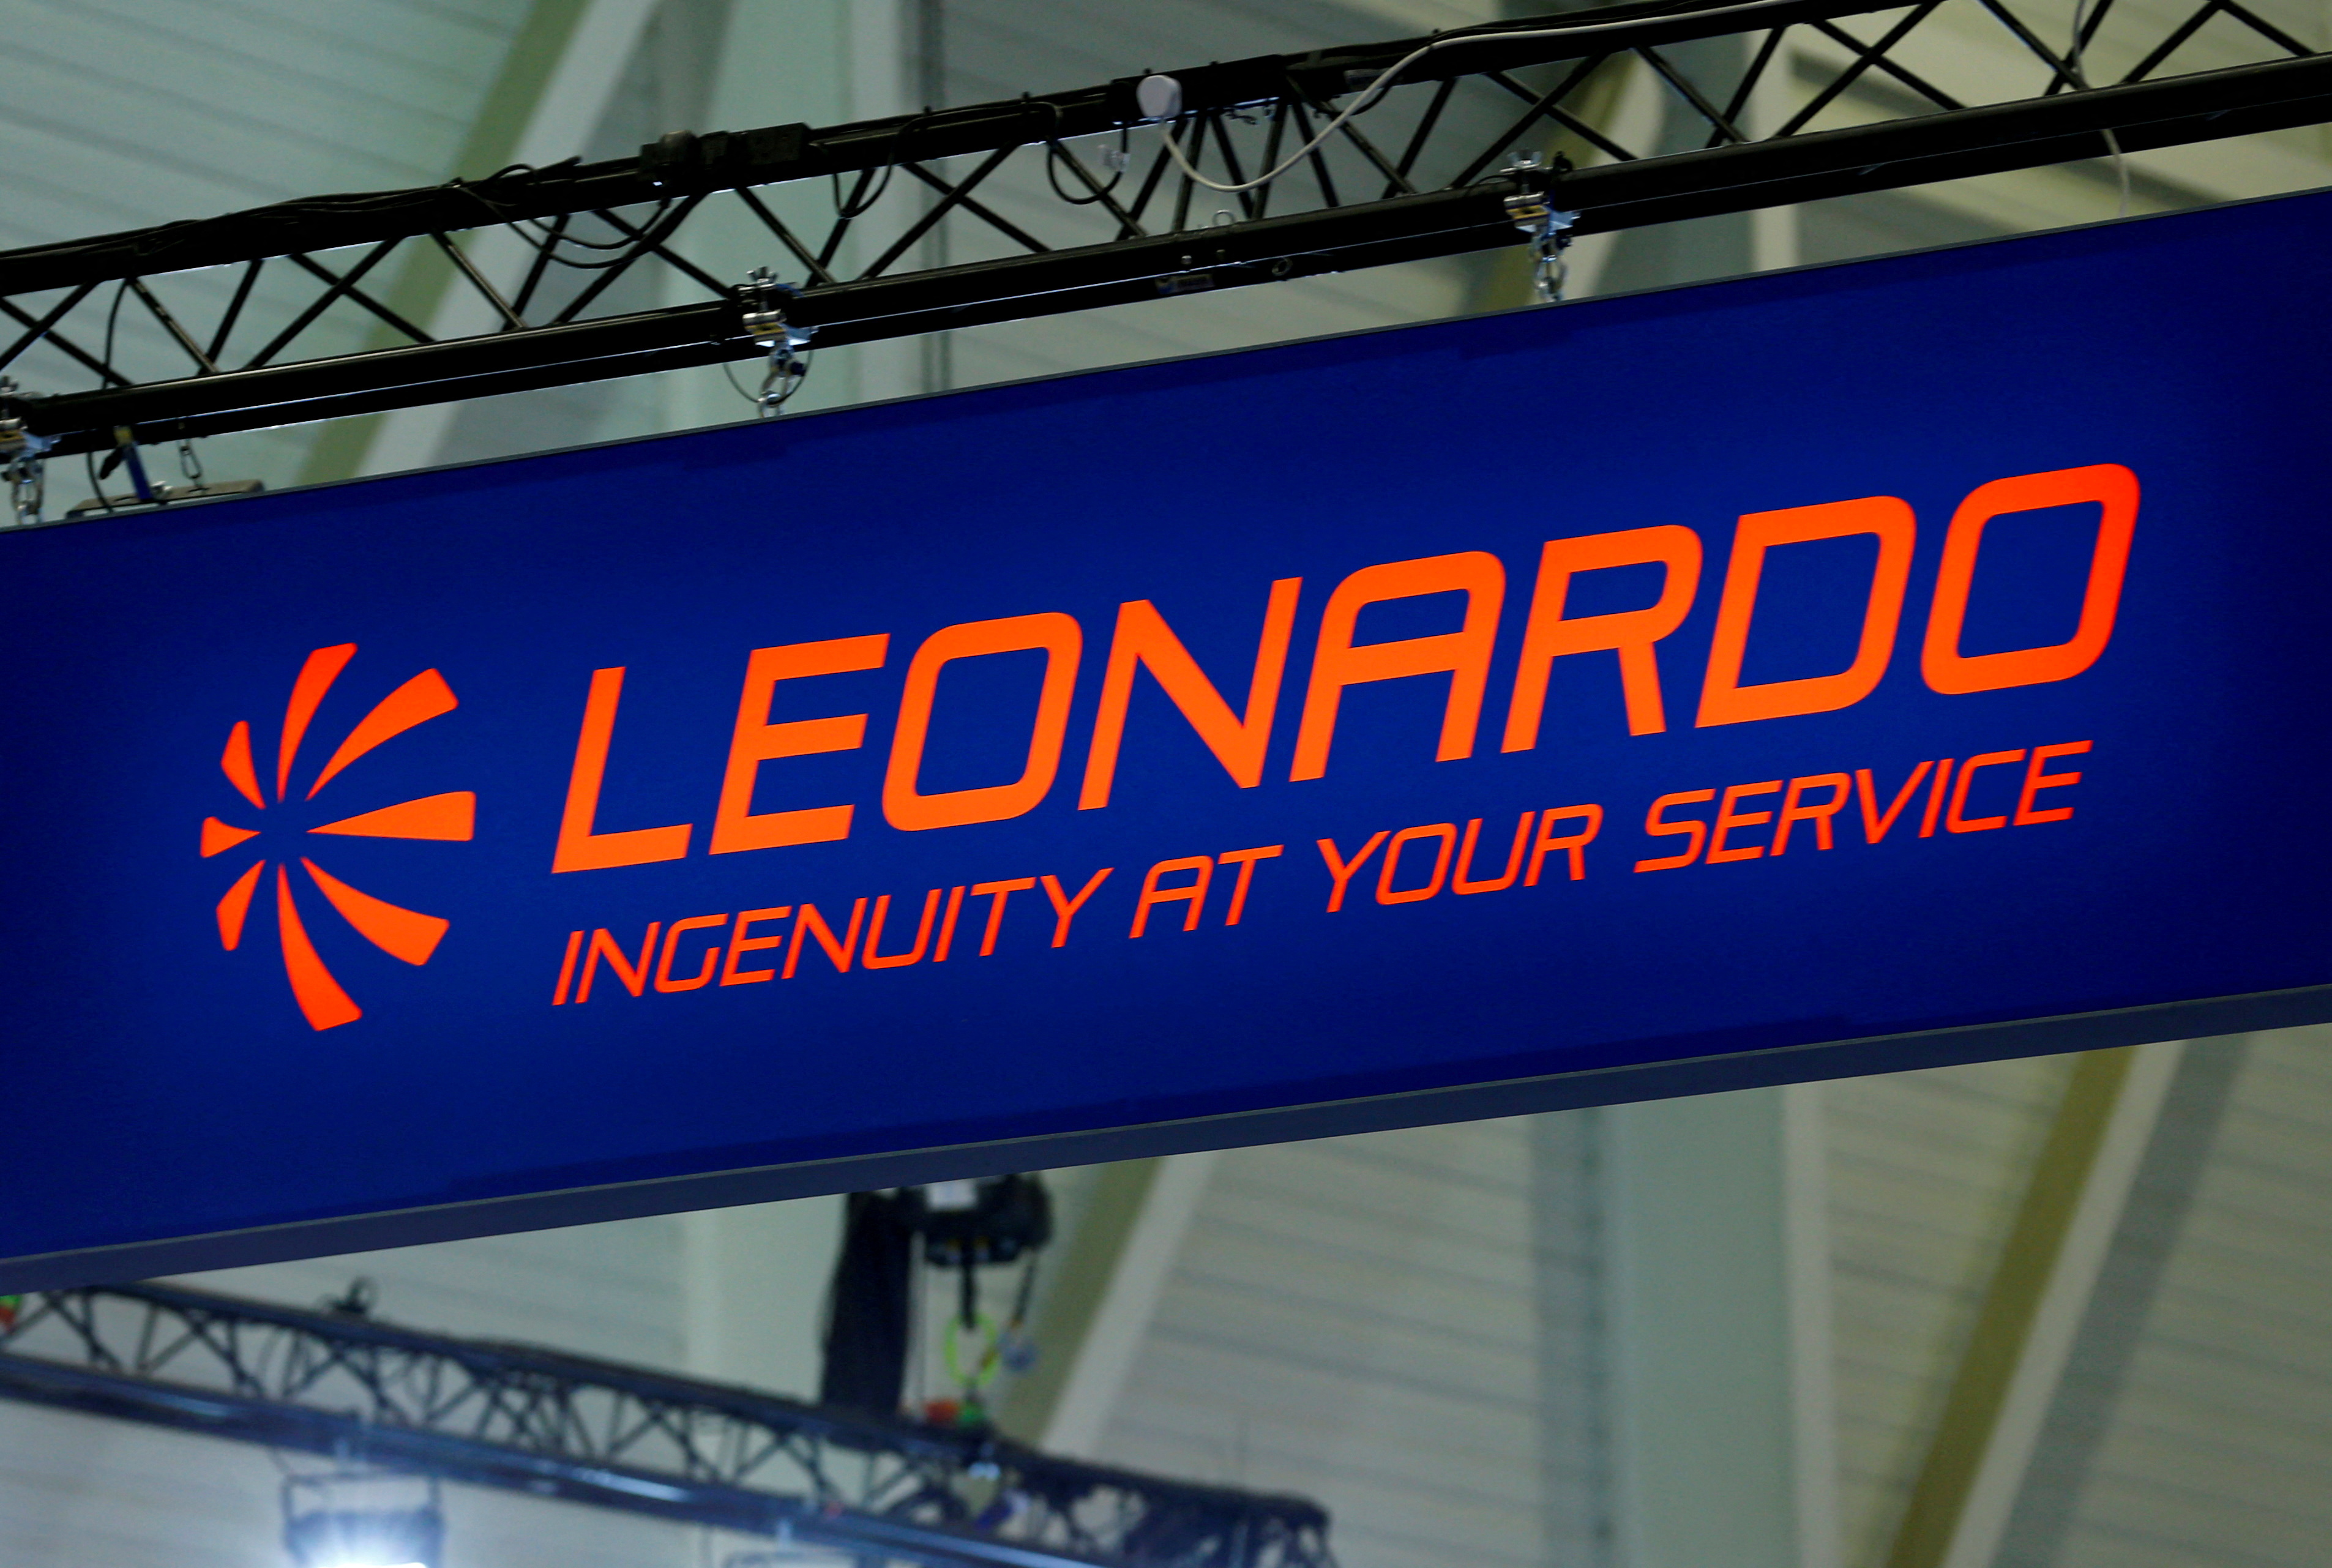 A logo of defence group Leonardo is pictured on their booth during EBACE in Geneva